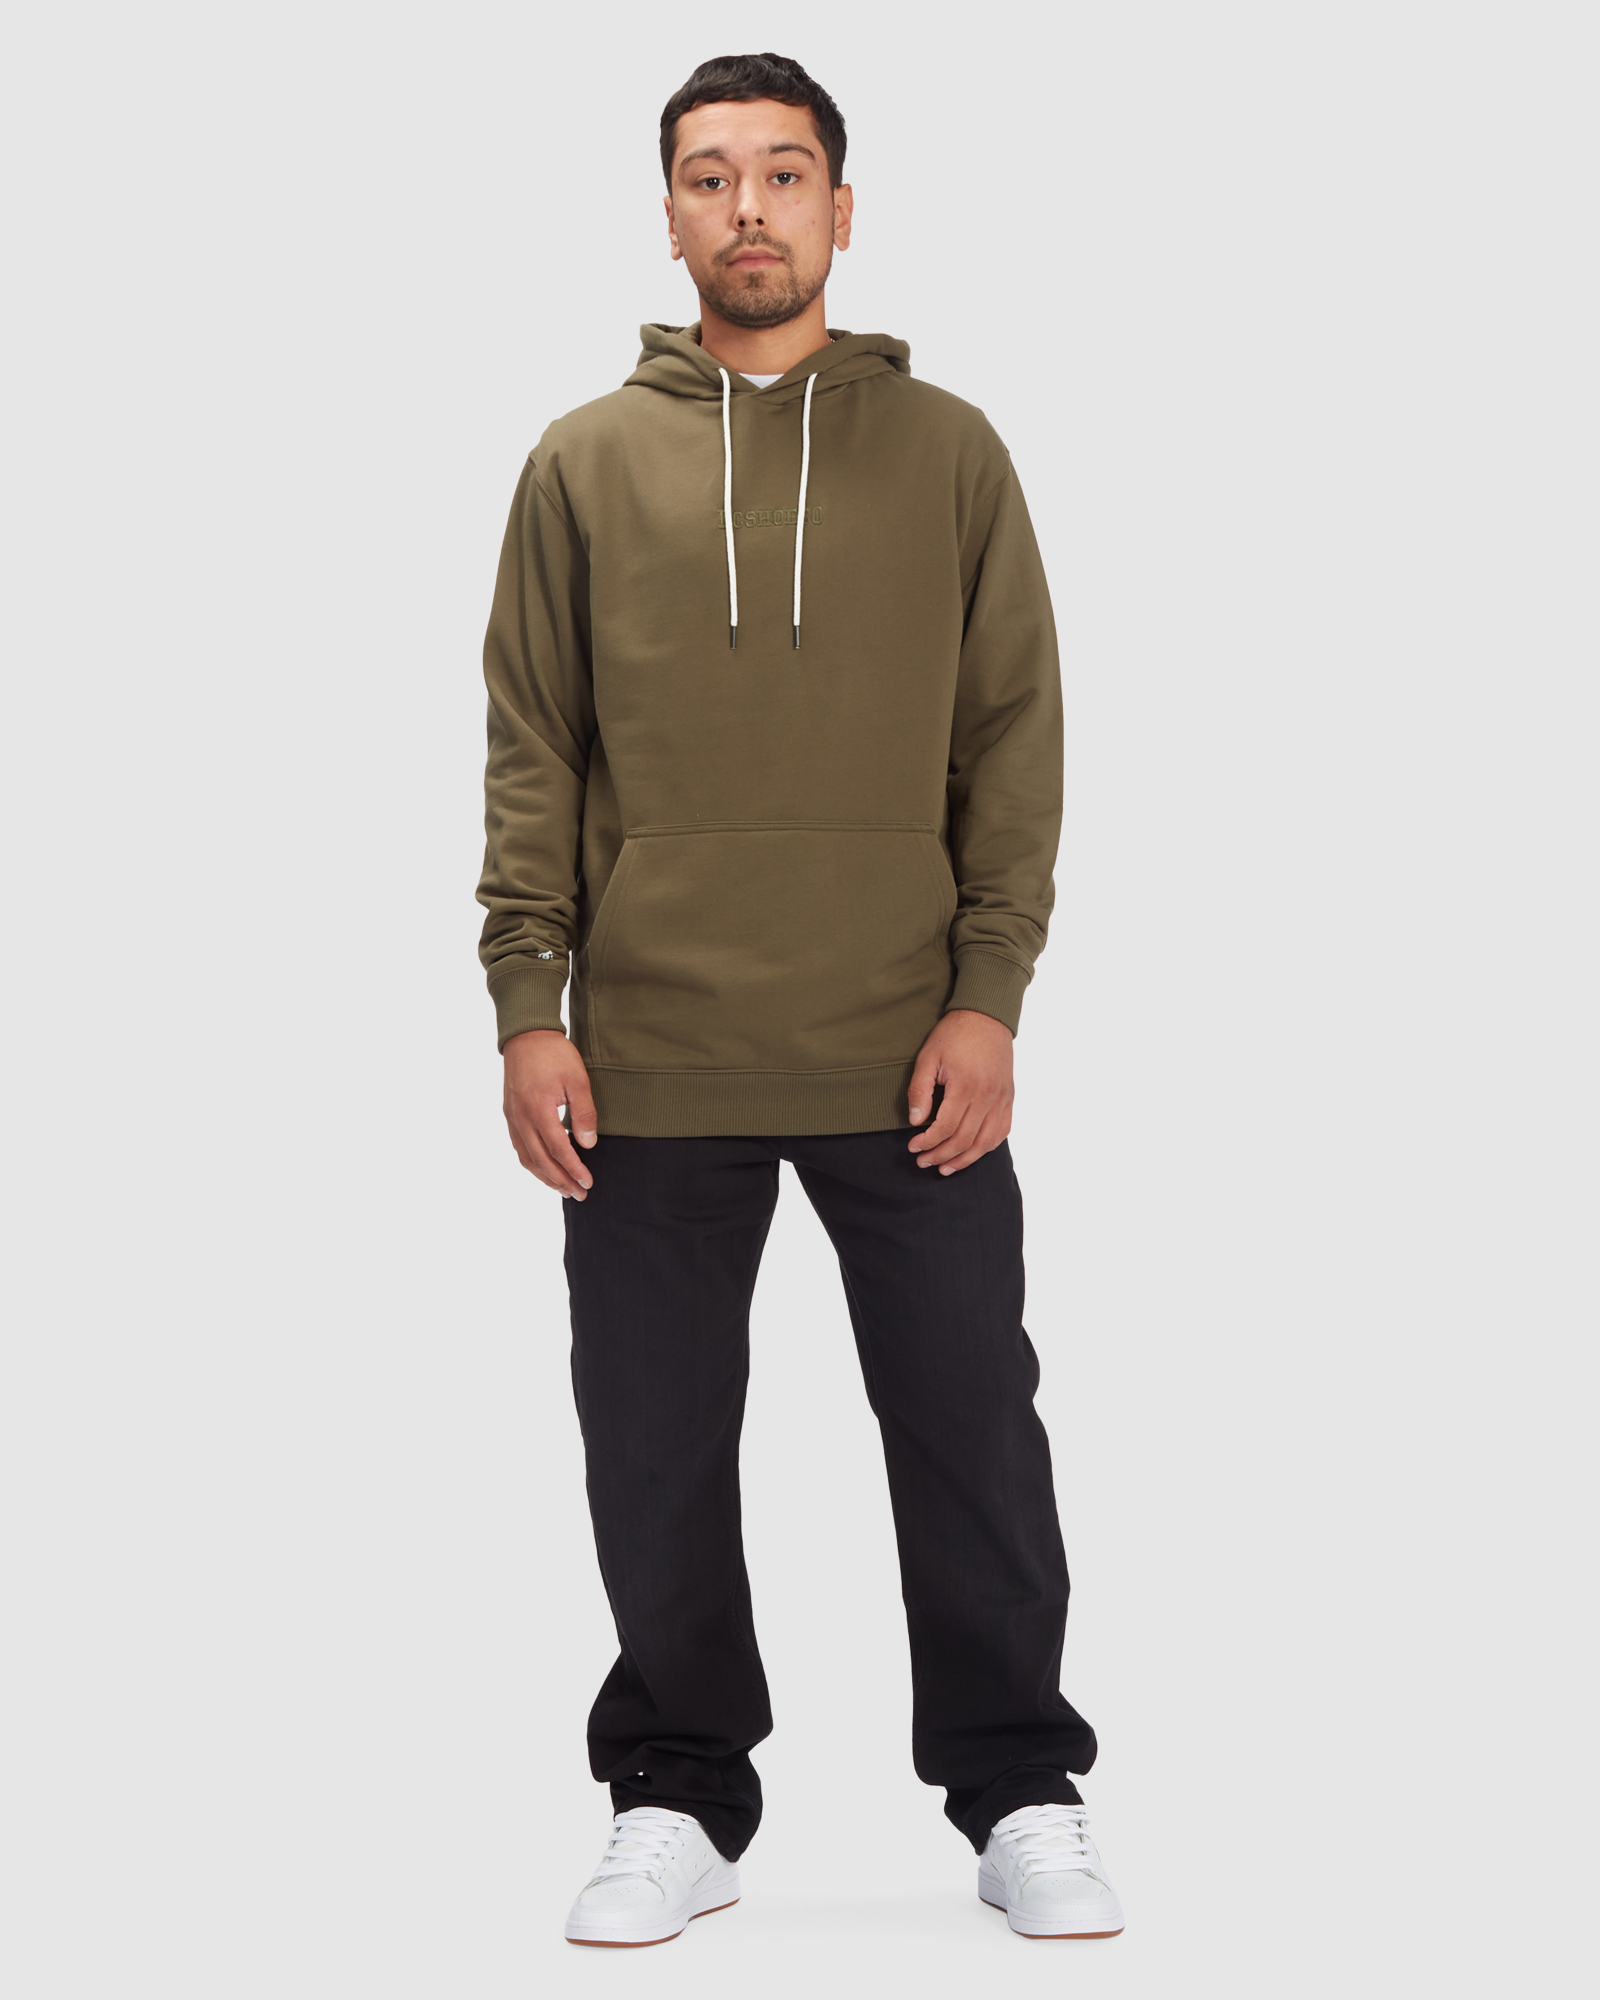 Dc Shoes Men's Riot 2 Hoodie - Ivy Green | SurfStitch